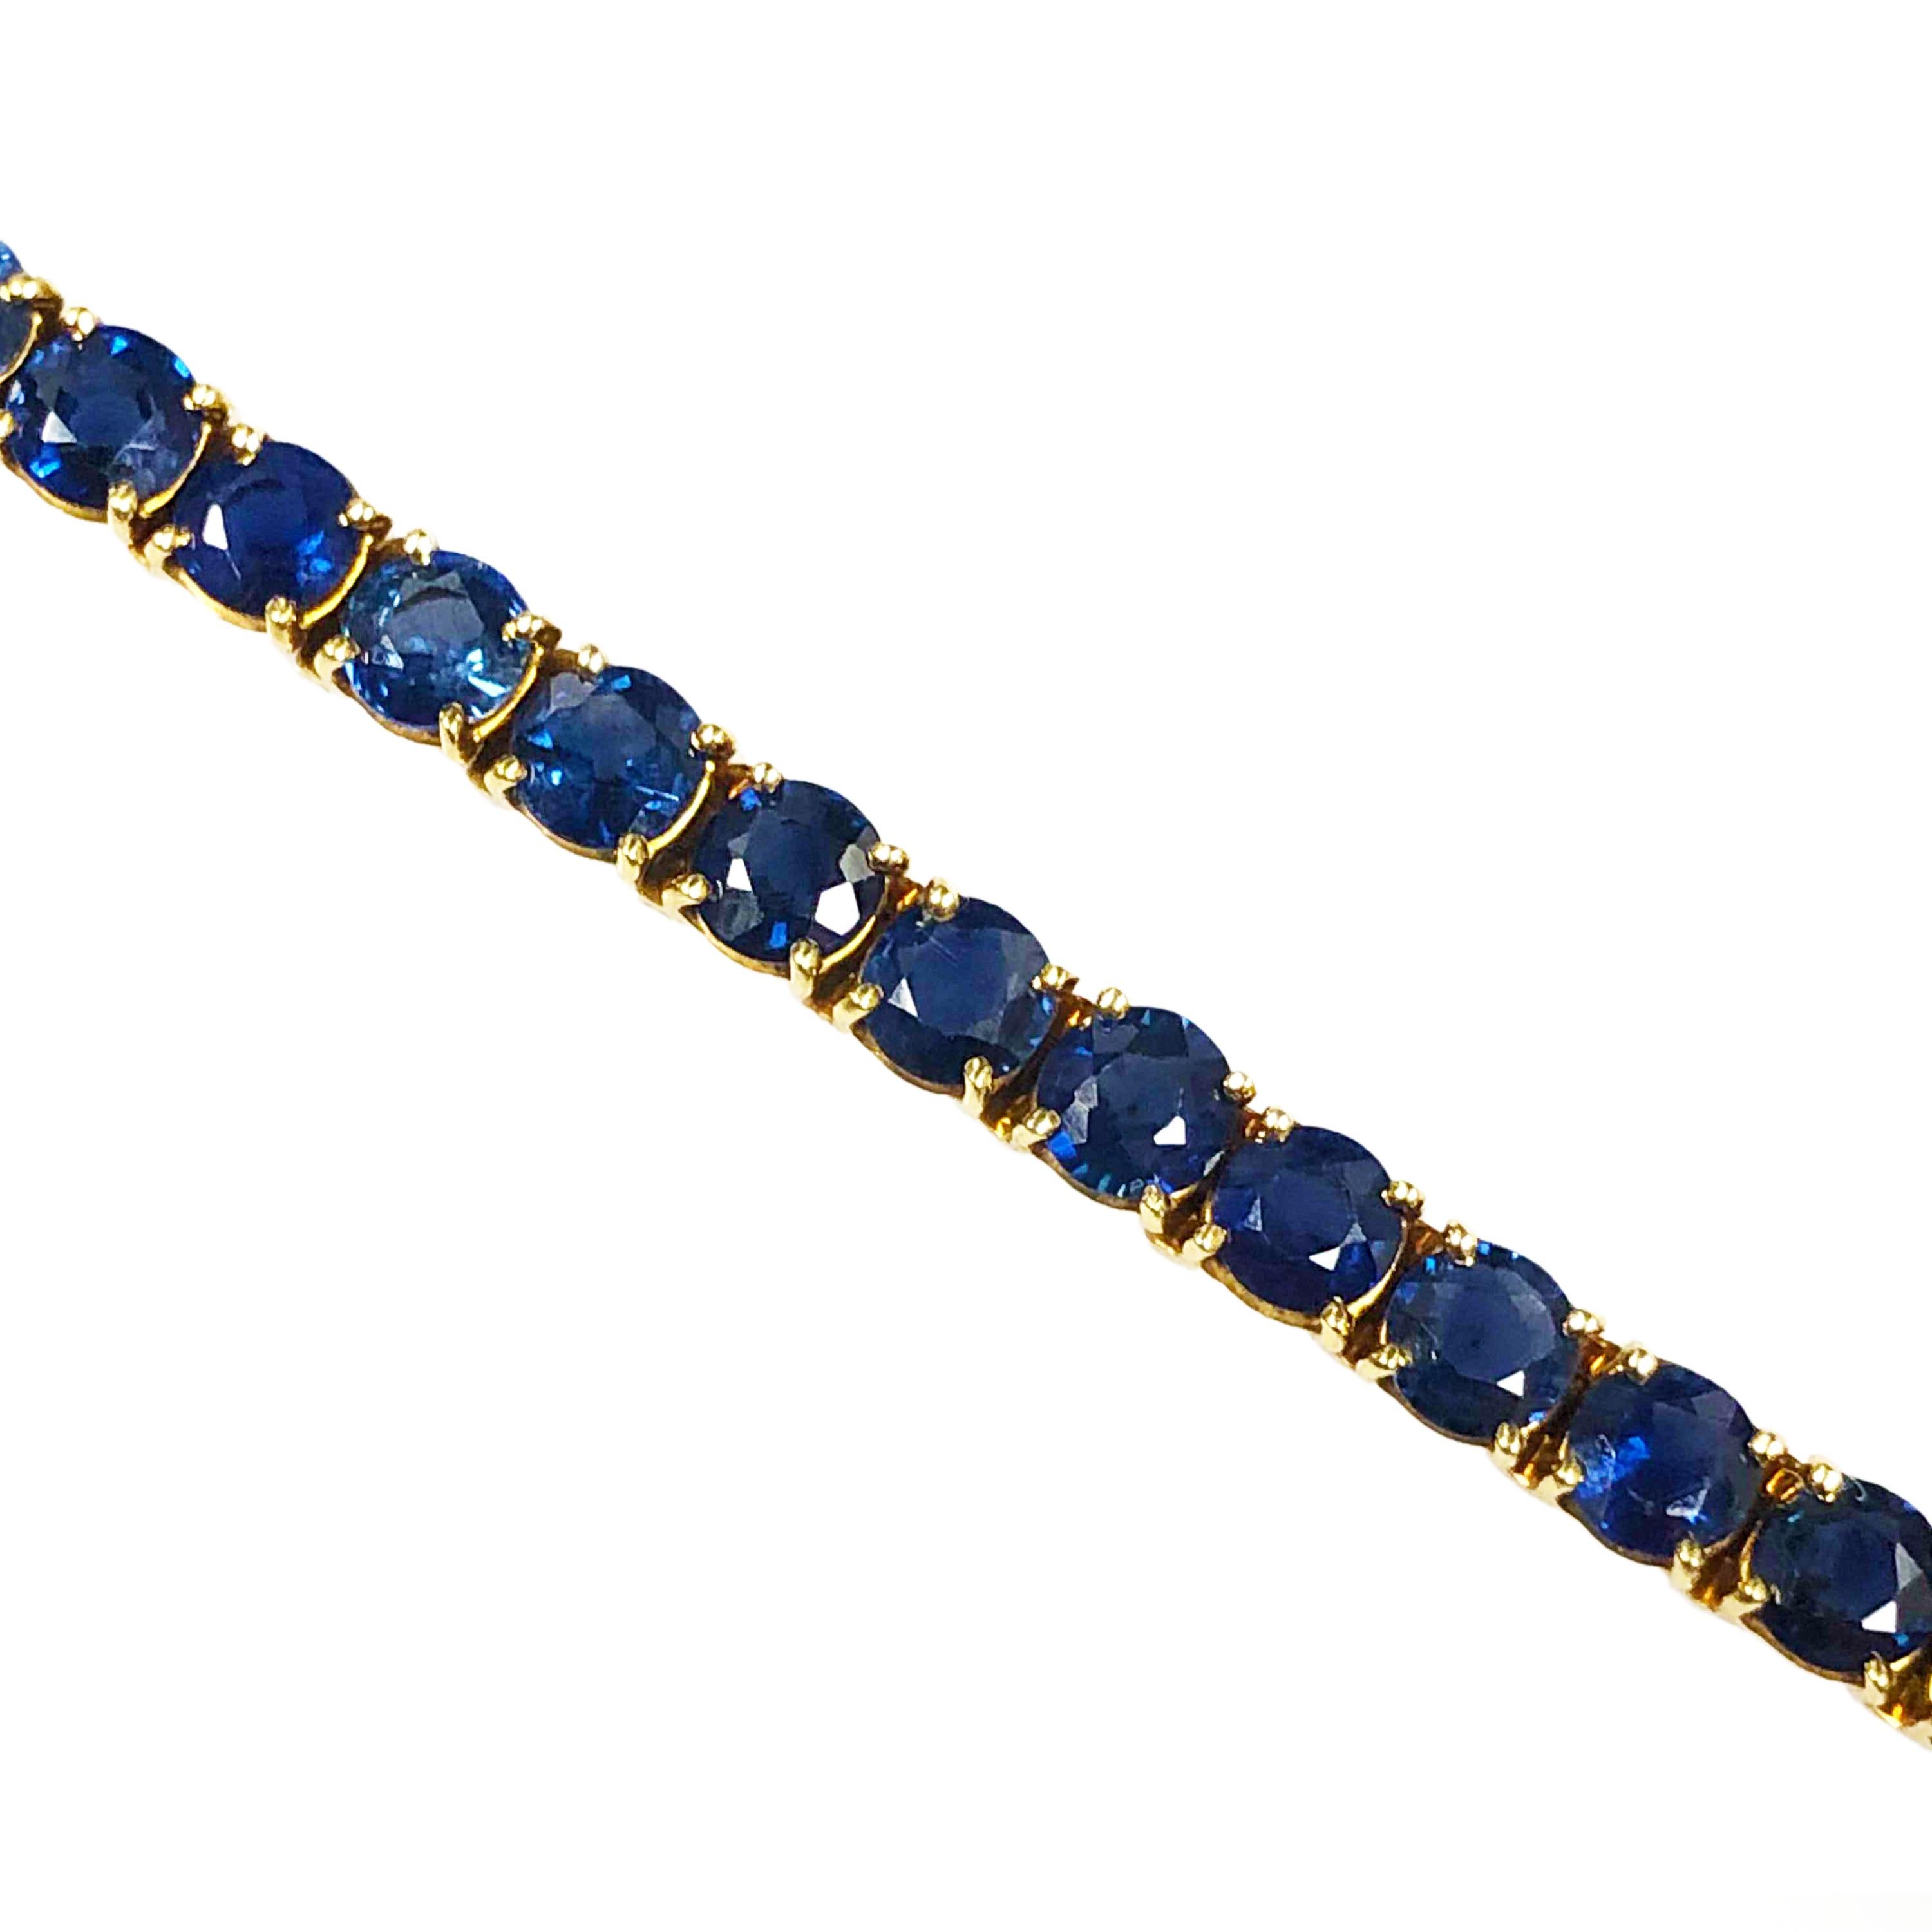 Circa 1970s VCA Van Cleef & Arpels 18K Yellow Gold Tennis, Line Bracelet, measuring 6 1/2 inches in length and 3/16 inch wide. Set with Fine Color Sapphires totaling 4 Carats. 